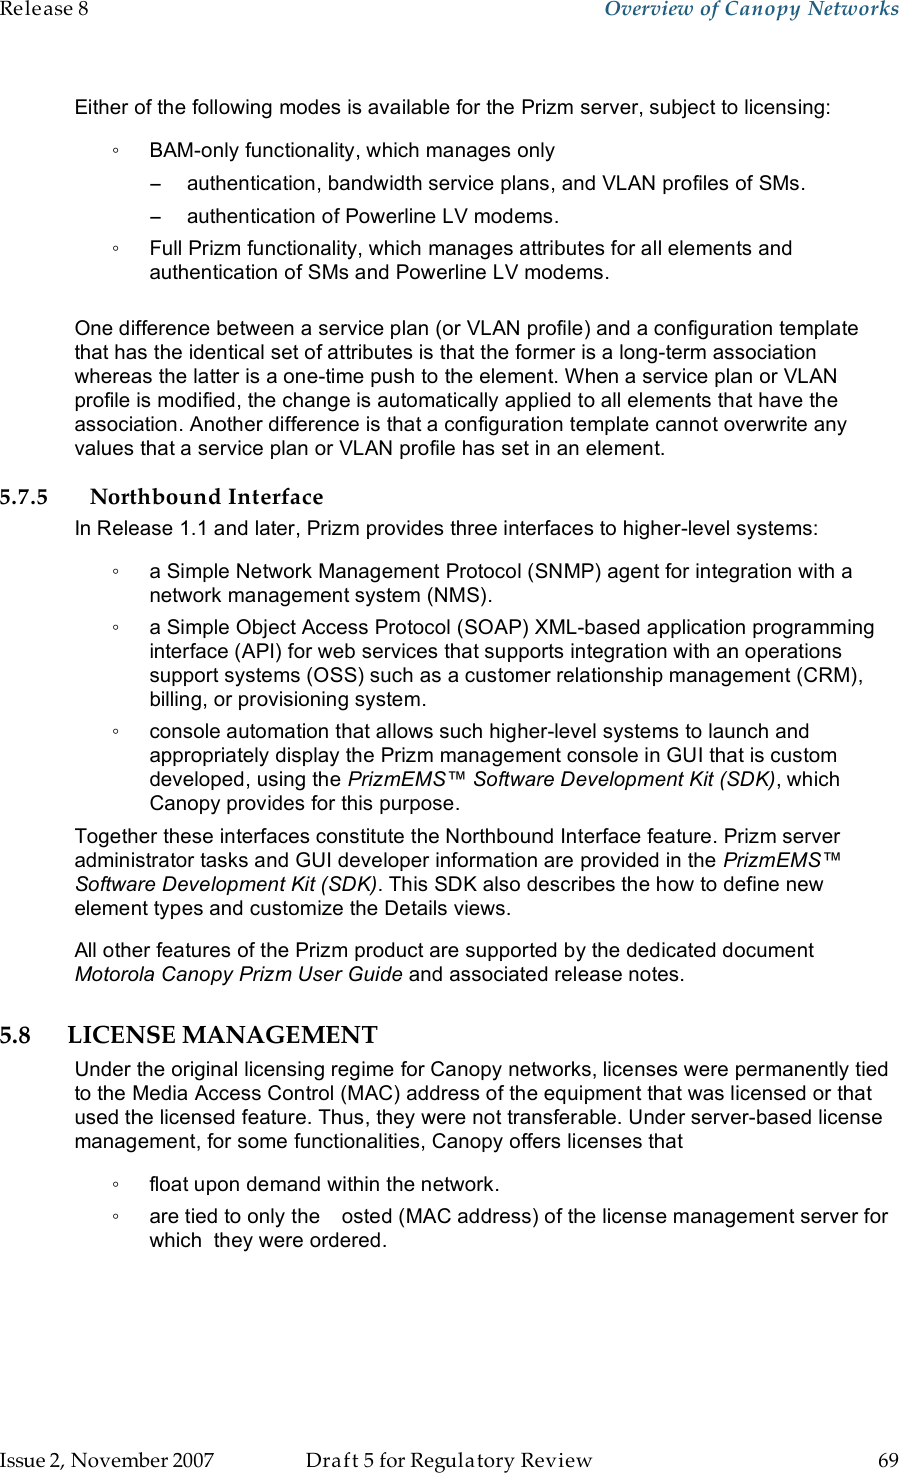 Release 8    Overview of Canopy Networks                  March 200                  Through Software Release 6.   Issue 2, November 2007  Draft 5 for Regulatory Review  69     Either of the following modes is available for the Prizm server, subject to licensing: ◦  BAM-only functionality, which manages only  −  authentication, bandwidth service plans, and VLAN profiles of SMs. −  authentication of Powerline LV modems. ◦  Full Prizm functionality, which manages attributes for all elements and authentication of SMs and Powerline LV modems.  One difference between a service plan (or VLAN profile) and a configuration template that has the identical set of attributes is that the former is a long-term association whereas the latter is a one-time push to the element. When a service plan or VLAN profile is modified, the change is automatically applied to all elements that have the association. Another difference is that a configuration template cannot overwrite any values that a service plan or VLAN profile has set in an element. 5.7.5 Northbound Interface In Release 1.1 and later, Prizm provides three interfaces to higher-level systems: ◦  a Simple Network Management Protocol (SNMP) agent for integration with a network management system (NMS). ◦  a Simple Object Access Protocol (SOAP) XML-based application programming interface (API) for web services that supports integration with an operations support systems (OSS) such as a customer relationship management (CRM), billing, or provisioning system. ◦  console automation that allows such higher-level systems to launch and appropriately display the Prizm management console in GUI that is custom developed, using the PrizmEMS™ Software Development Kit (SDK), which Canopy provides for this purpose. Together these interfaces constitute the Northbound Interface feature. Prizm server administrator tasks and GUI developer information are provided in the PrizmEMS™ Software Development Kit (SDK). This SDK also describes the how to define new element types and customize the Details views. All other features of the Prizm product are supported by the dedicated document Motorola Canopy Prizm User Guide and associated release notes. 5.8 LICENSE MANAGEMENT Under the original licensing regime for Canopy networks, licenses were permanently tied to the Media Access Control (MAC) address of the equipment that was licensed or that used the licensed feature. Thus, they were not transferable. Under server-based license management, for some functionalities, Canopy offers licenses that  ◦  float upon demand within the network.  ◦  are tied to only the  osted (MAC address) of the license management server for which  they were ordered.   